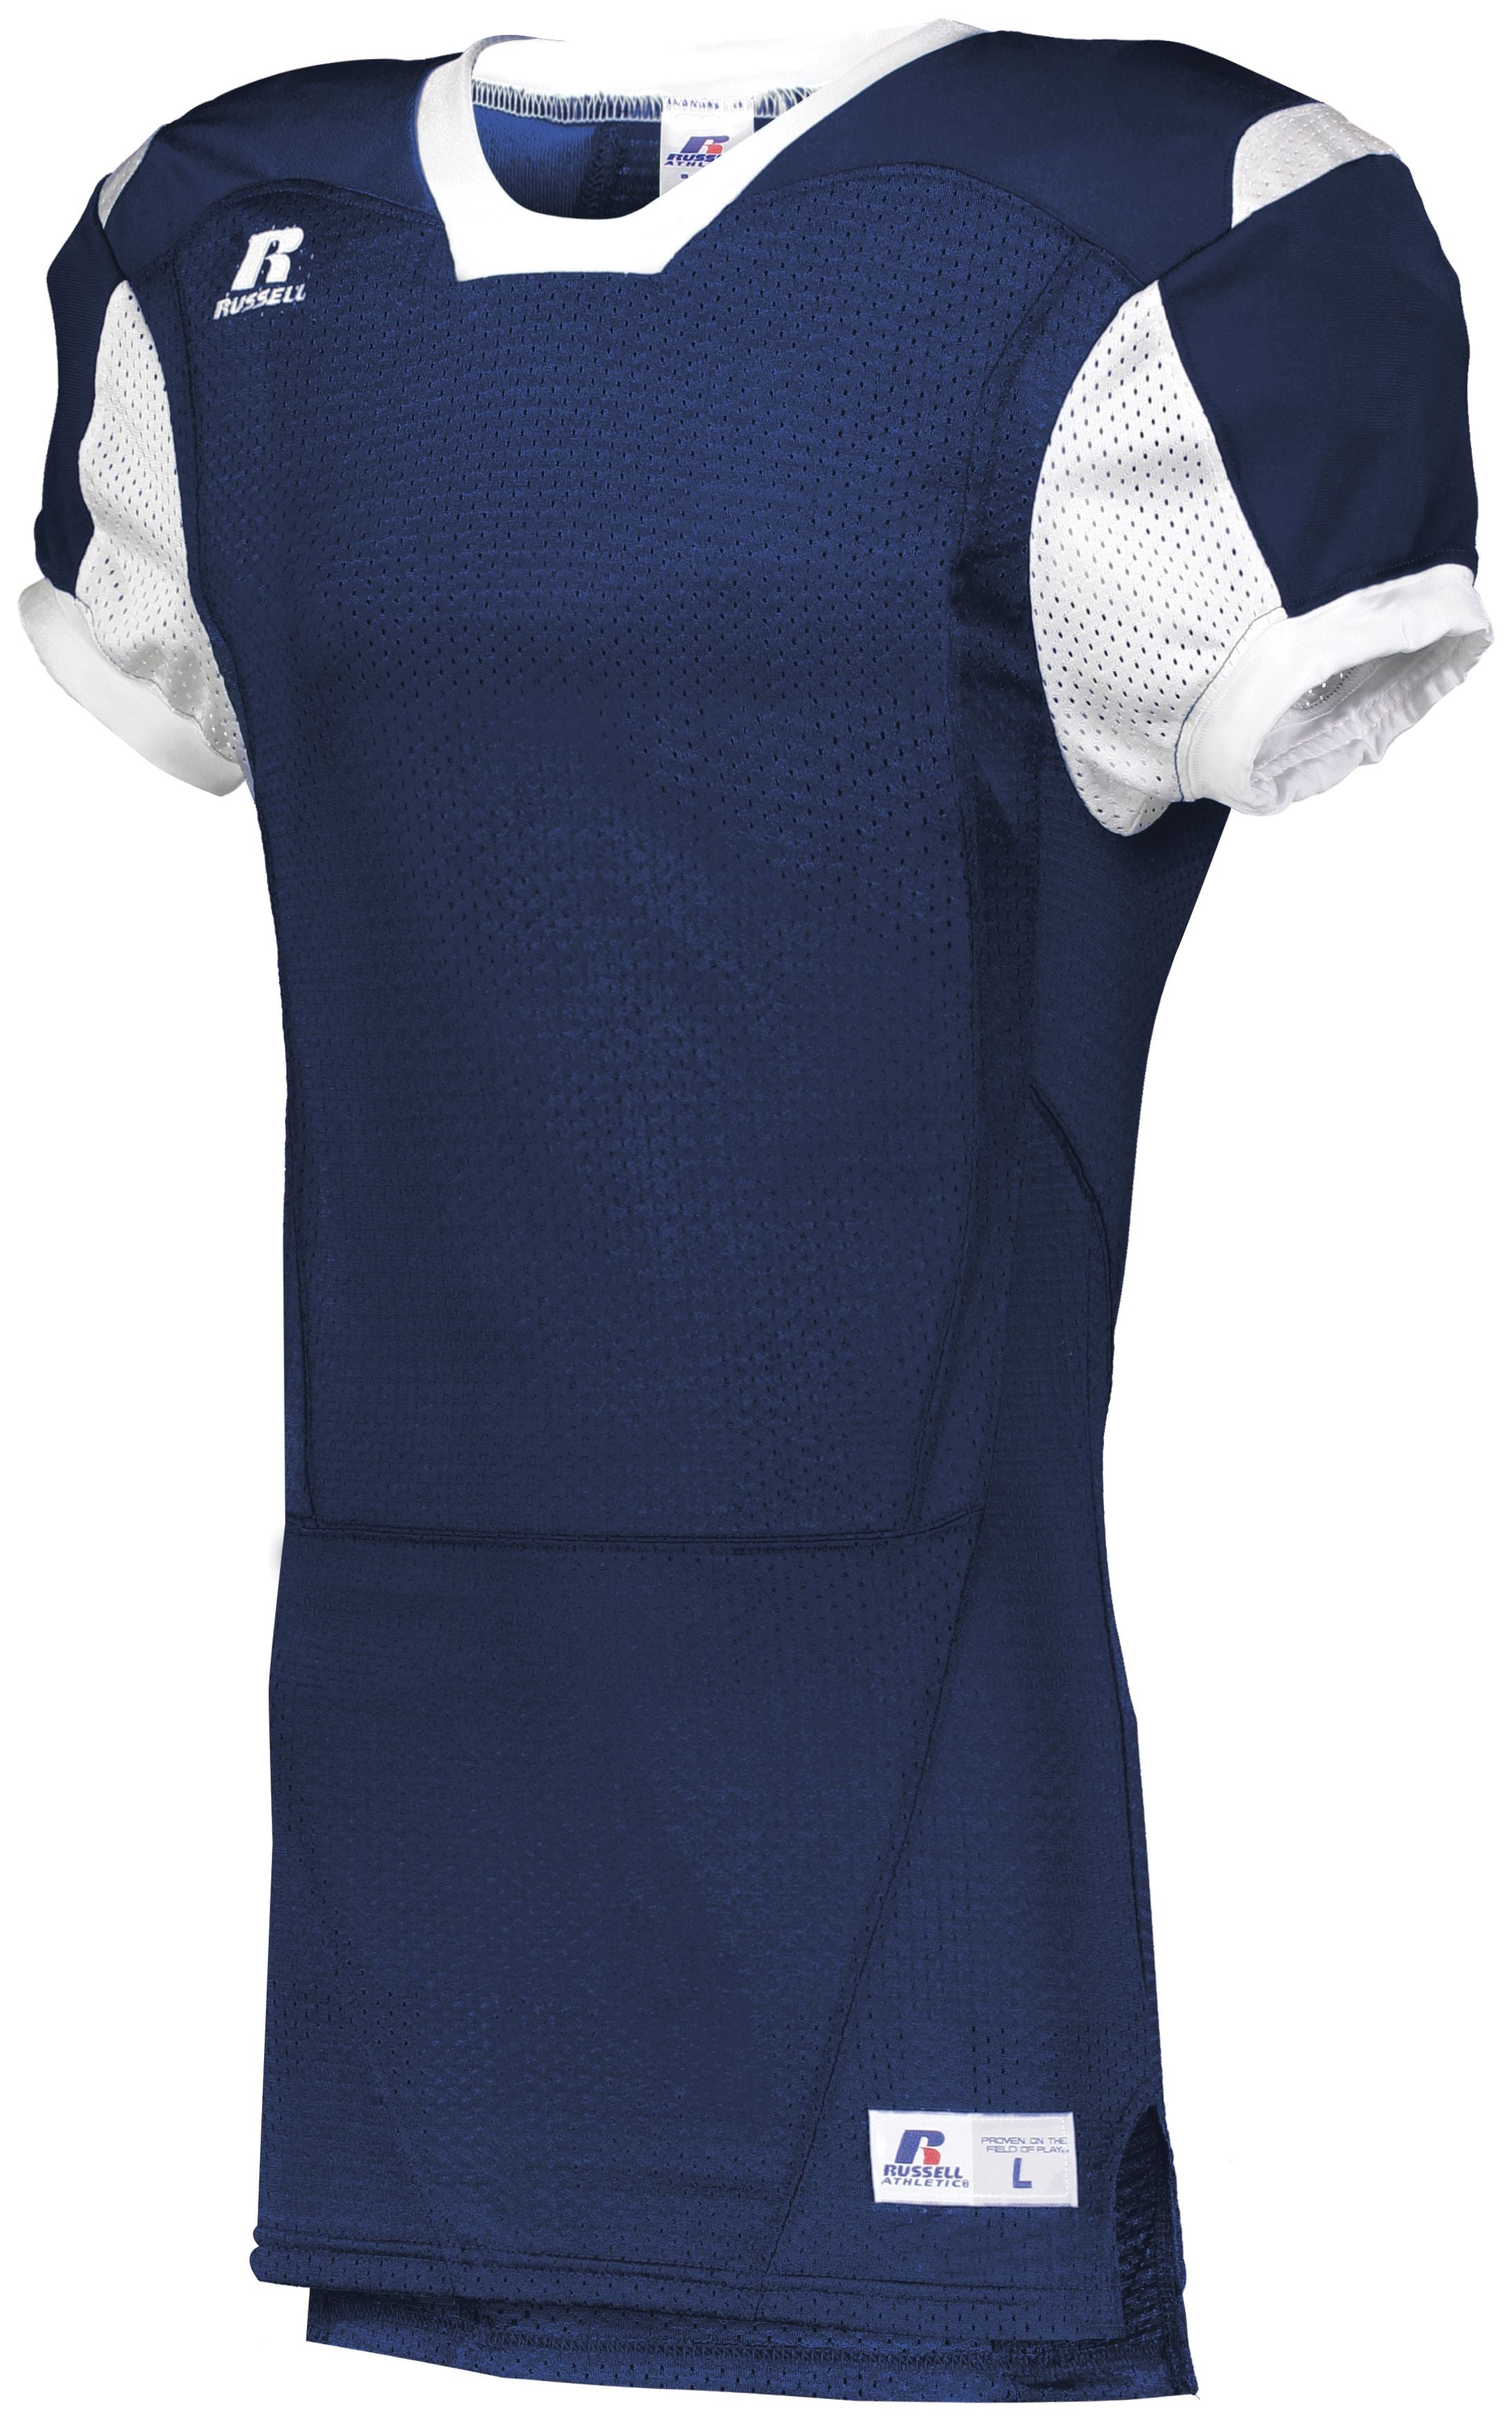 Russell Athletic Youth Color Block Game Jersey in Navy/White  -Part of the Youth, Youth-Jersey, Football, Russell-Athletic-Products, Shirts, All-Sports, All-Sports-1 product lines at KanaleyCreations.com